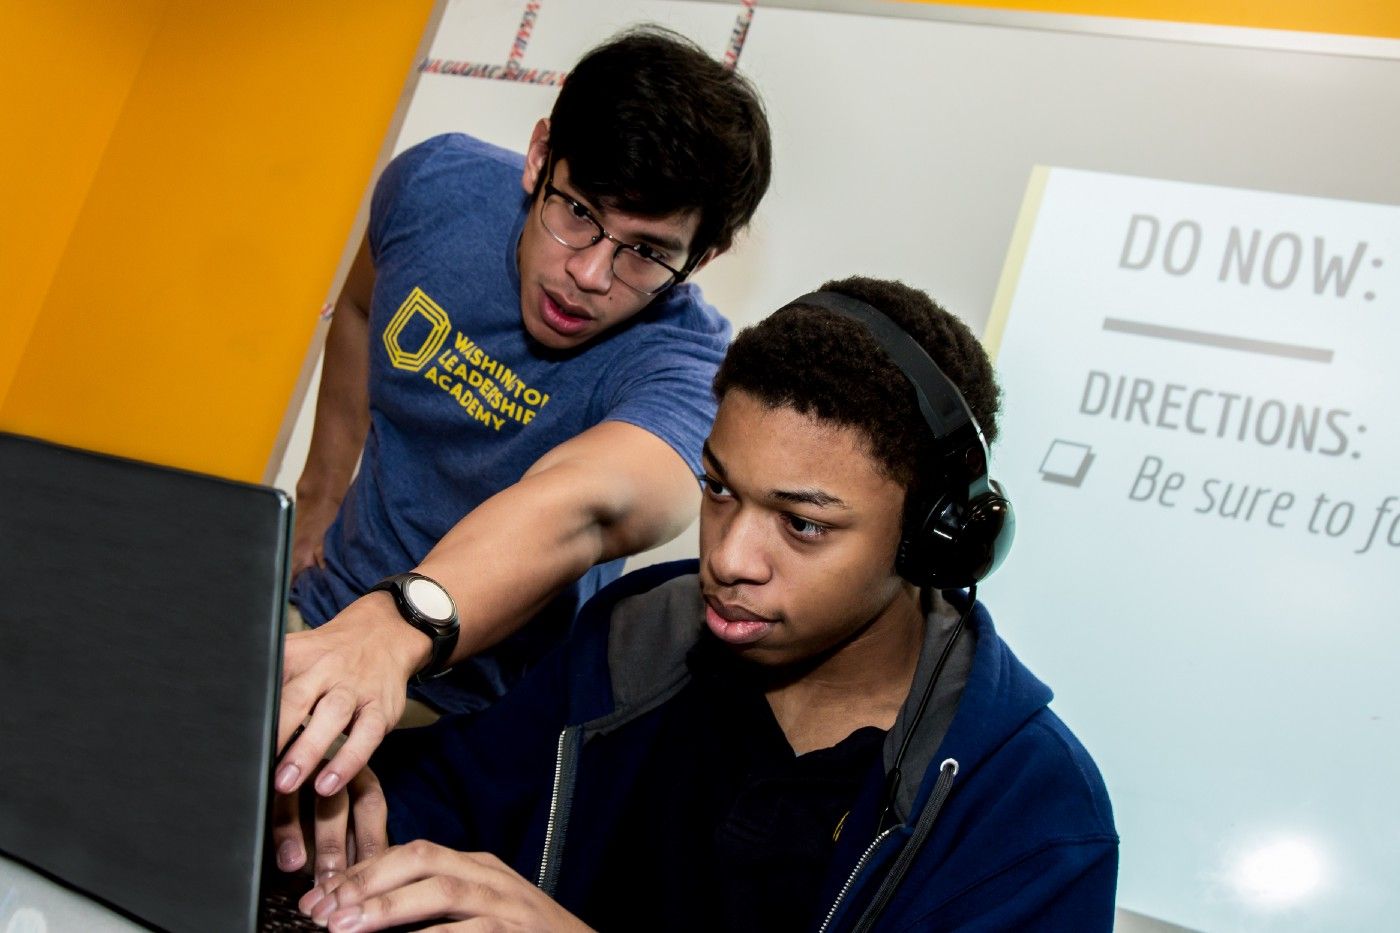 Two students working on a computer together.